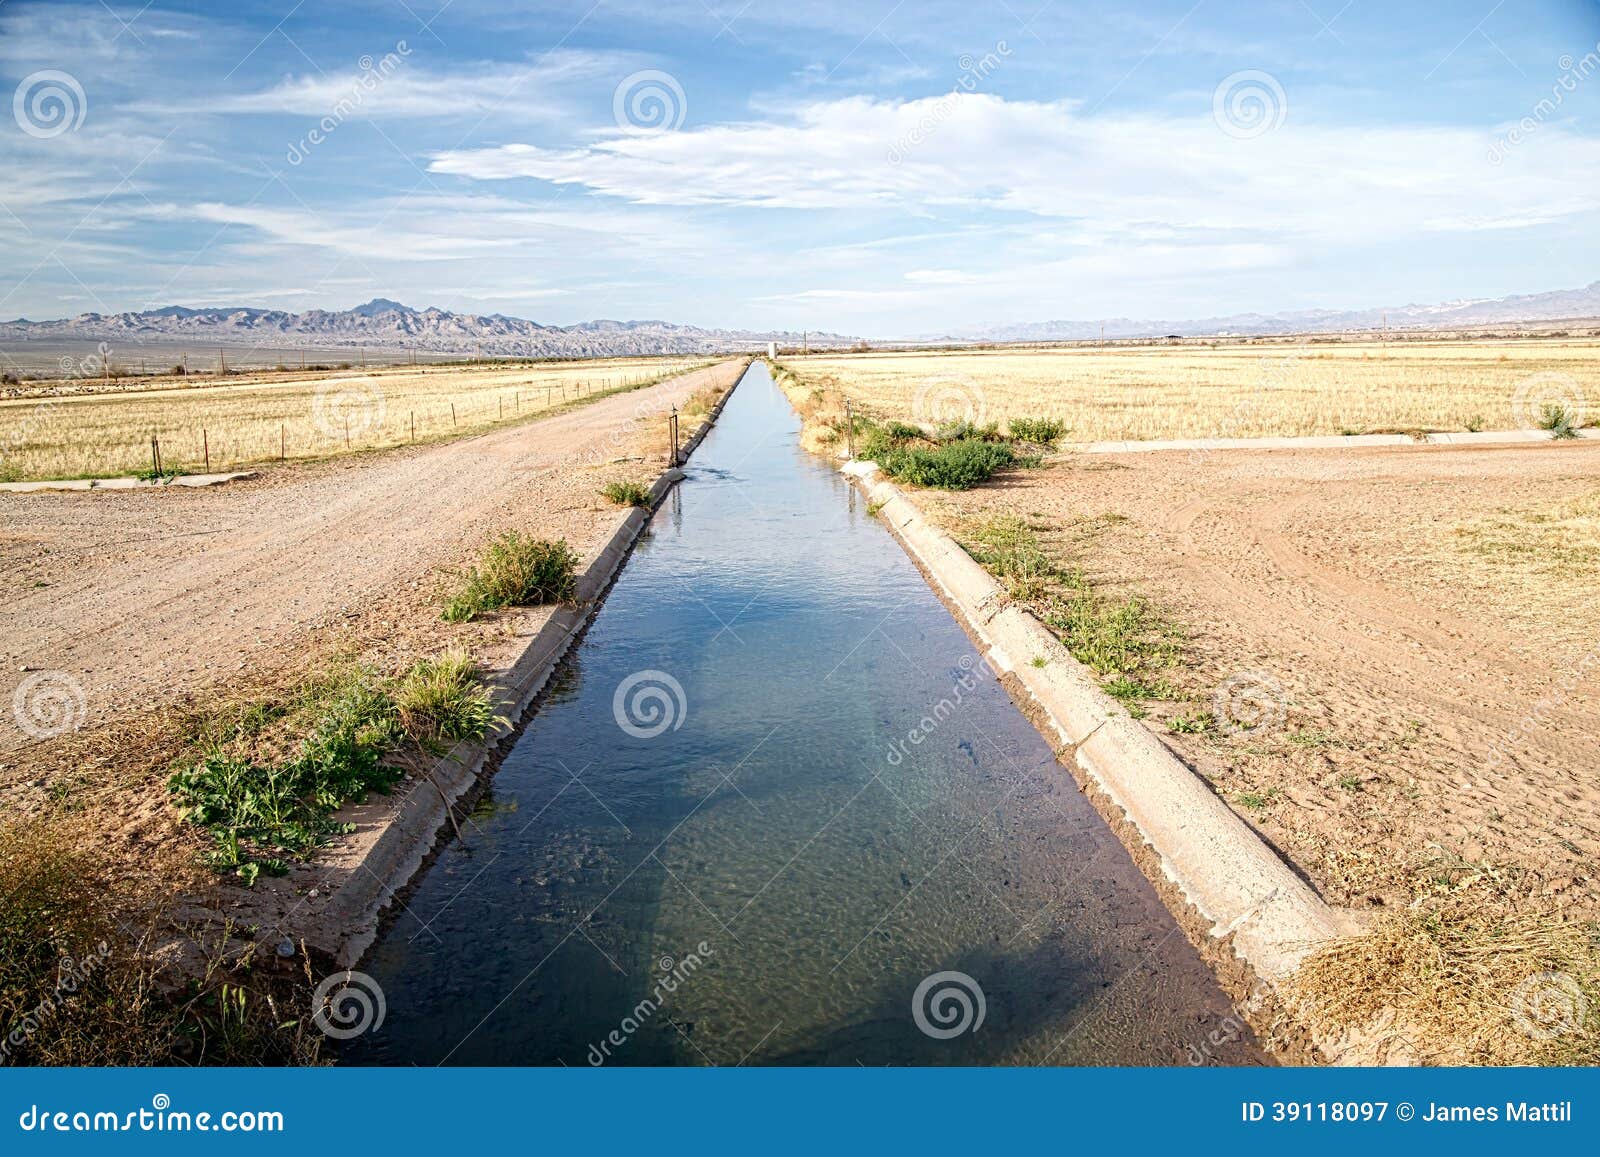 irrigation ditch with flowing water